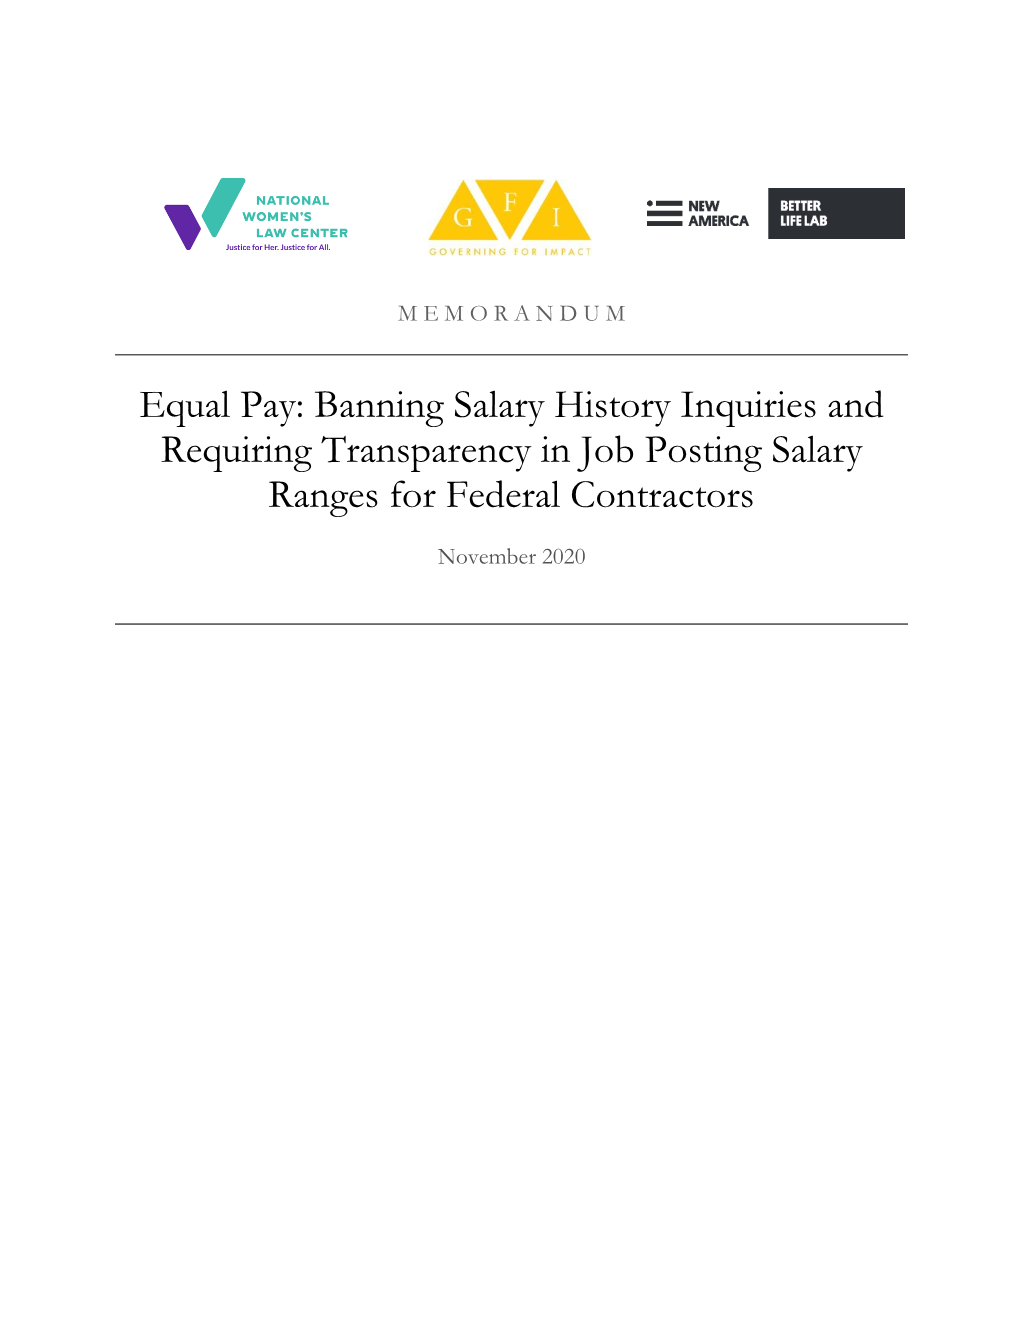 Equal Pay: Banning Salary History Inquiries and Requiring Transparency in Job Posting Salary Ranges for Federal Contractors